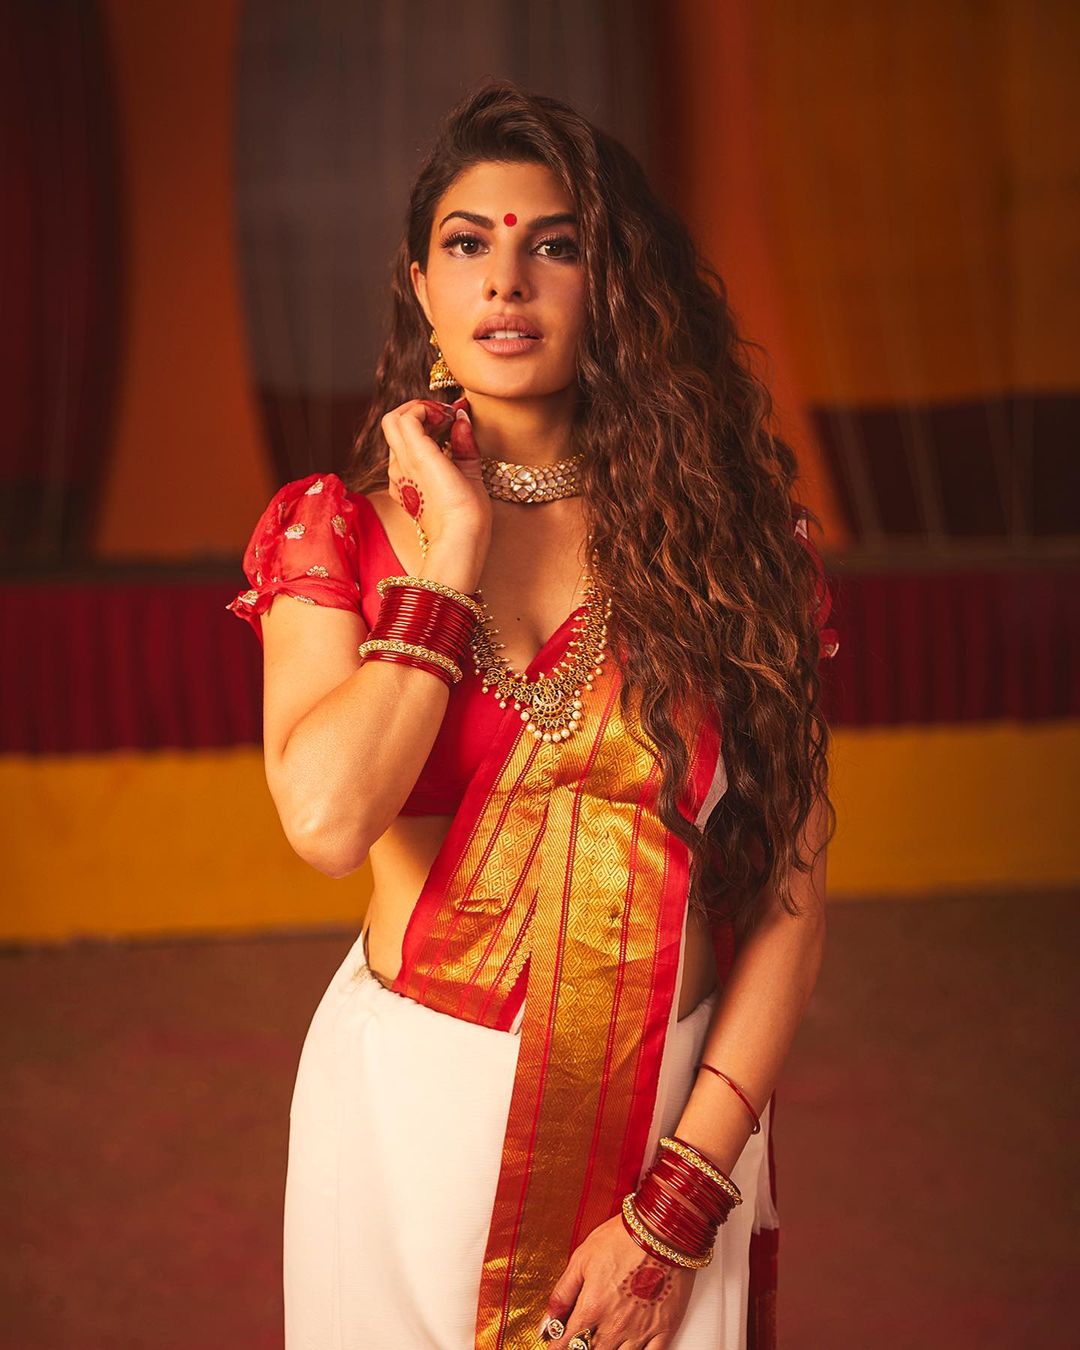 Jacqueline Fernandez looks beautiful in the white and red silk saree